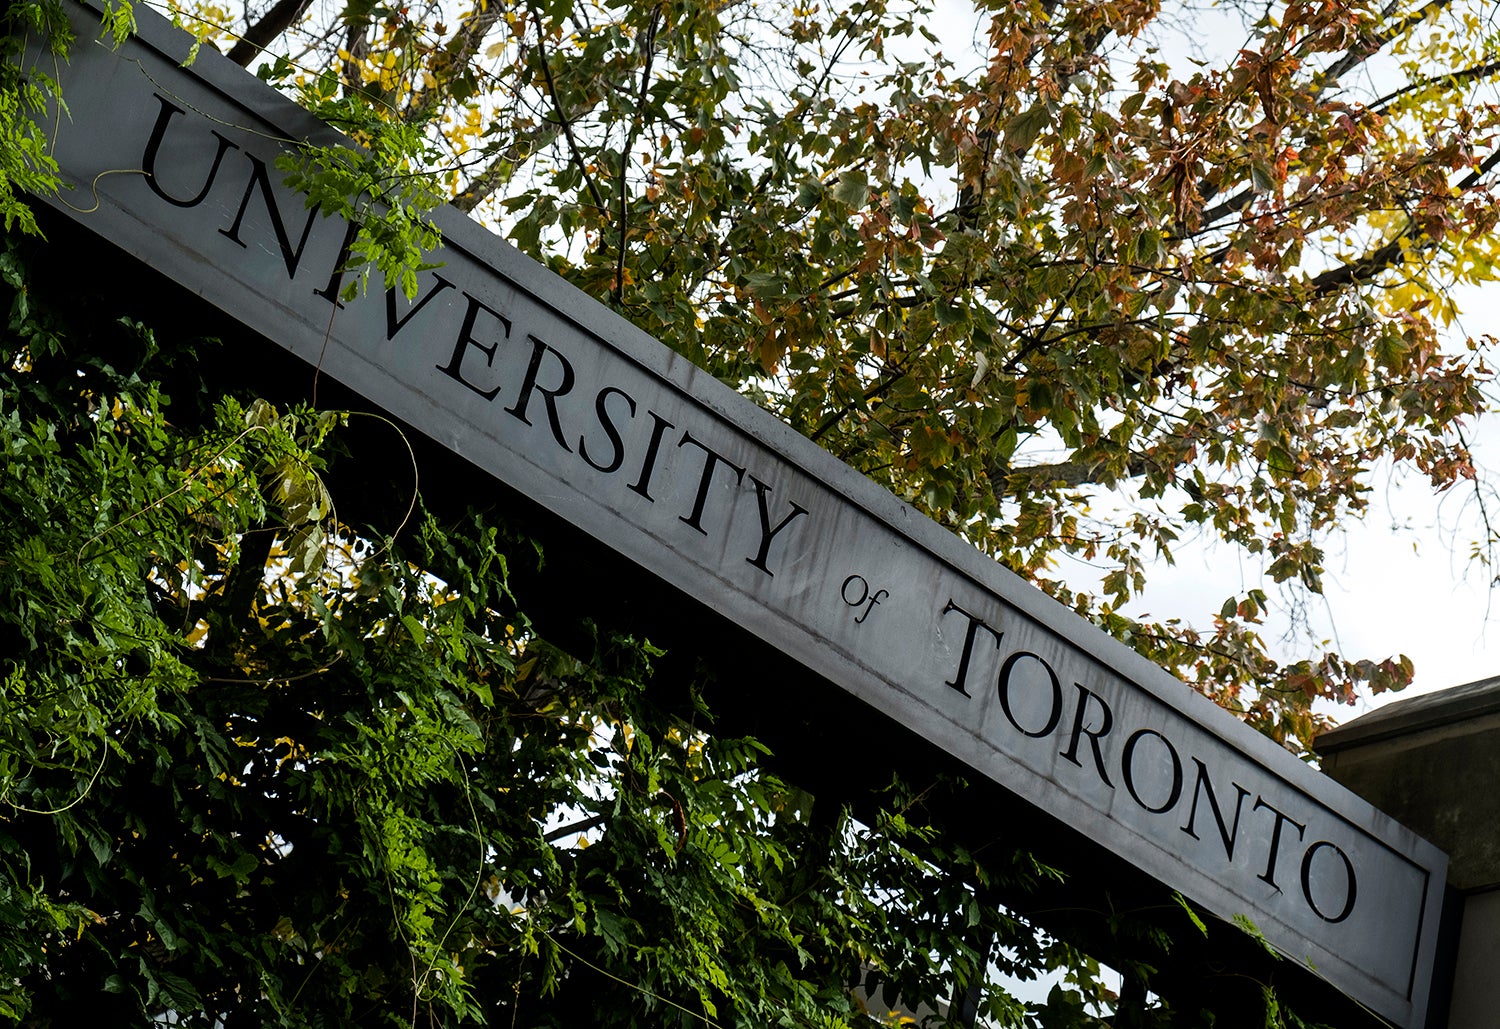 The University of Toronto sign at the University of Toronto St. George campus in Toronto, Ontario